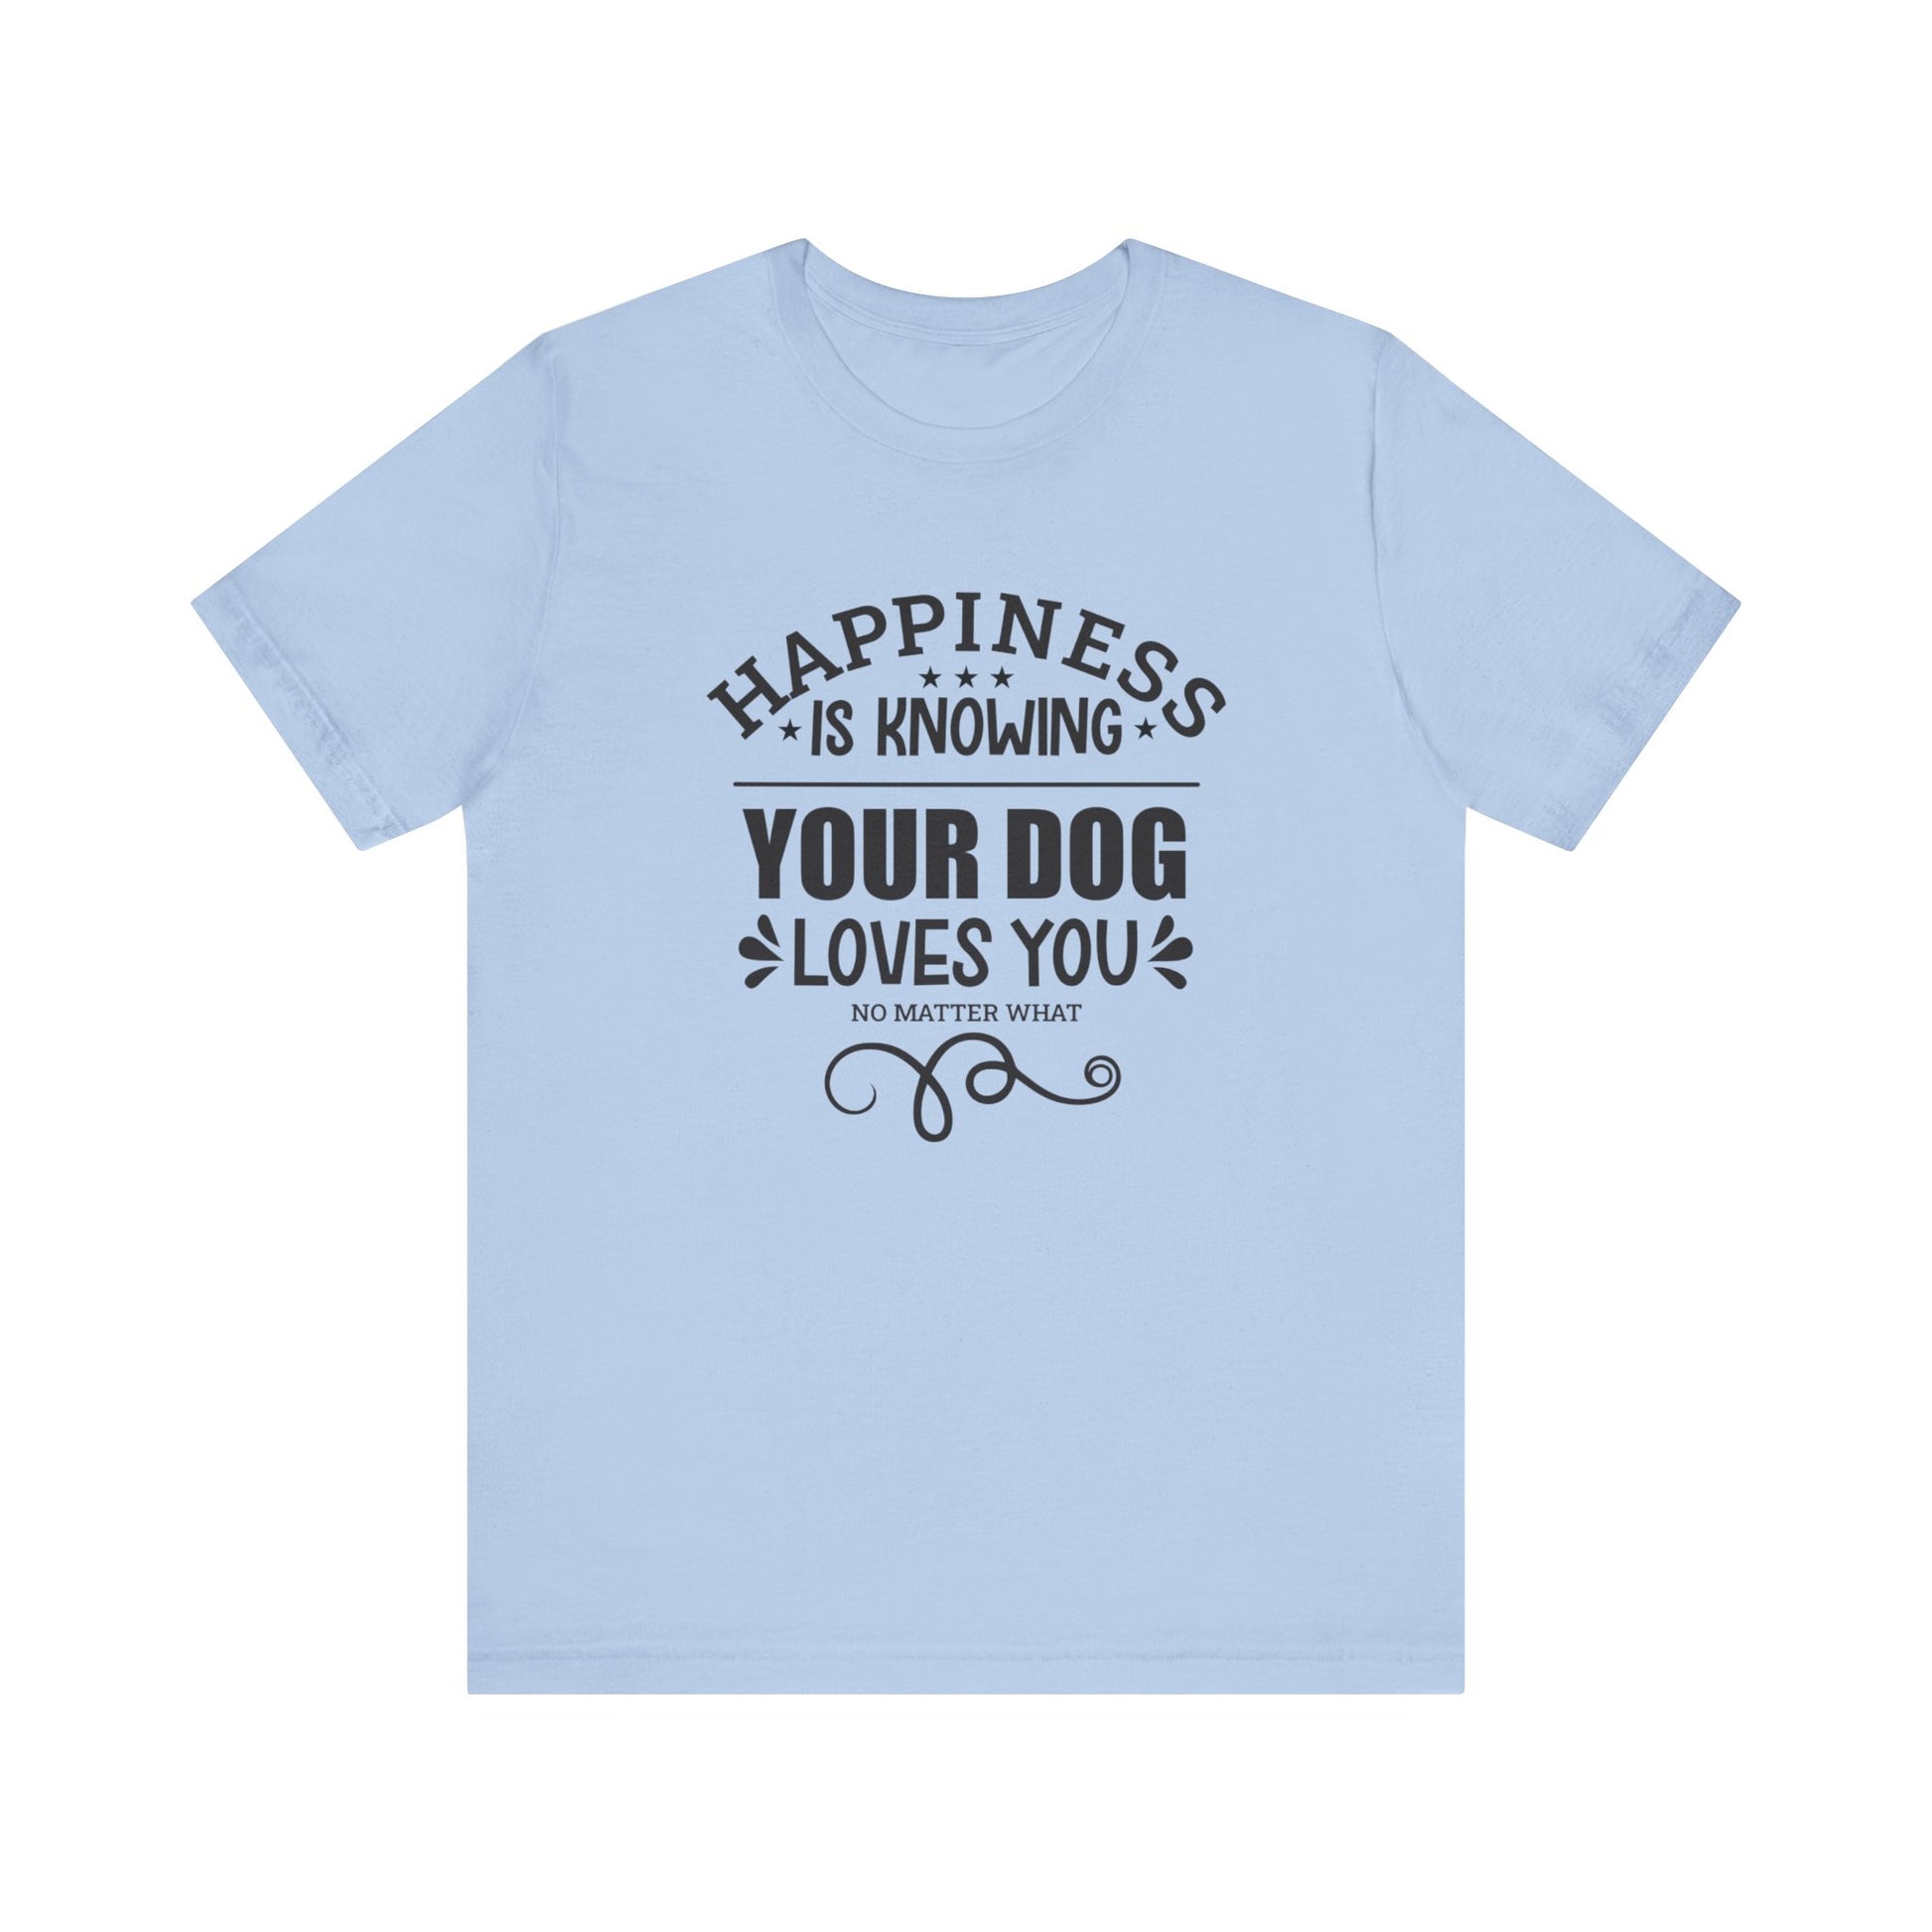 A baby blue unisex tee, featuring the slogan 'Happiness is knowing your dog loves you no matter what,' by Dogs Pure Love, is set against a white backdrop.